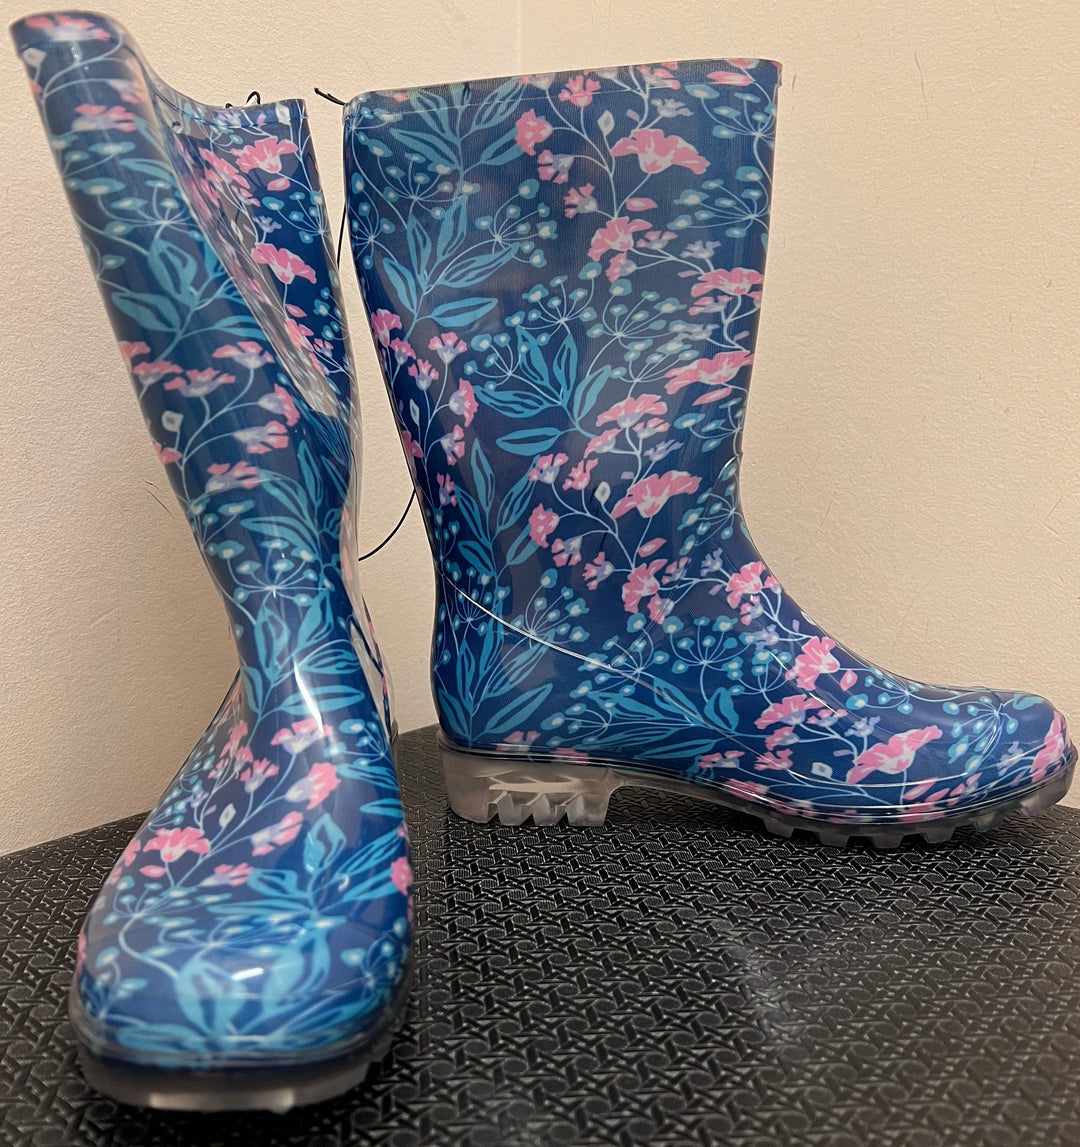 Patterned Rain Boots